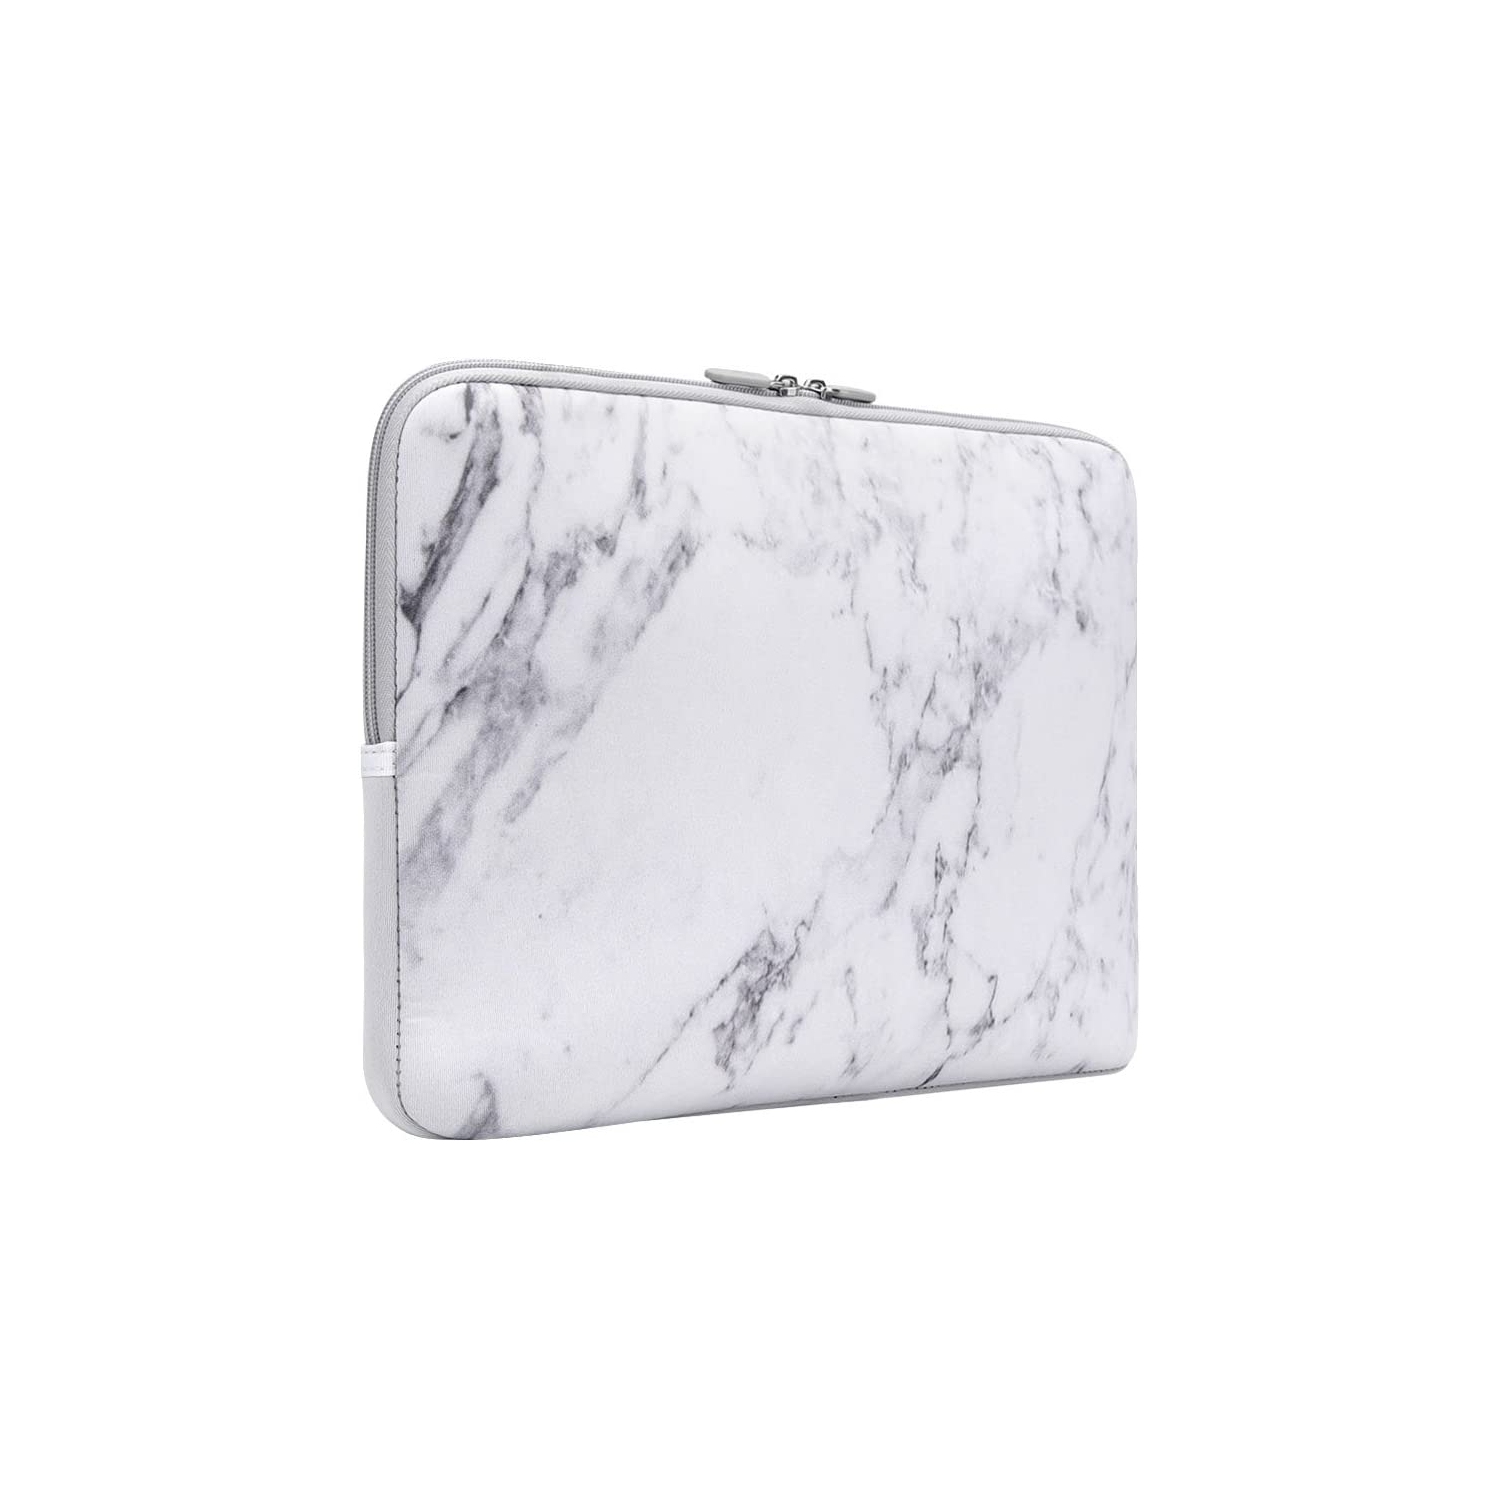 13-inch Laptop Sleeve Case Cover Stylish Soft Neoprene Protective Bag for MacBook Air/MacBook Pro/Surface Pro 4&3 /Lenovo Yoga/HP/Chromebook - White Marble